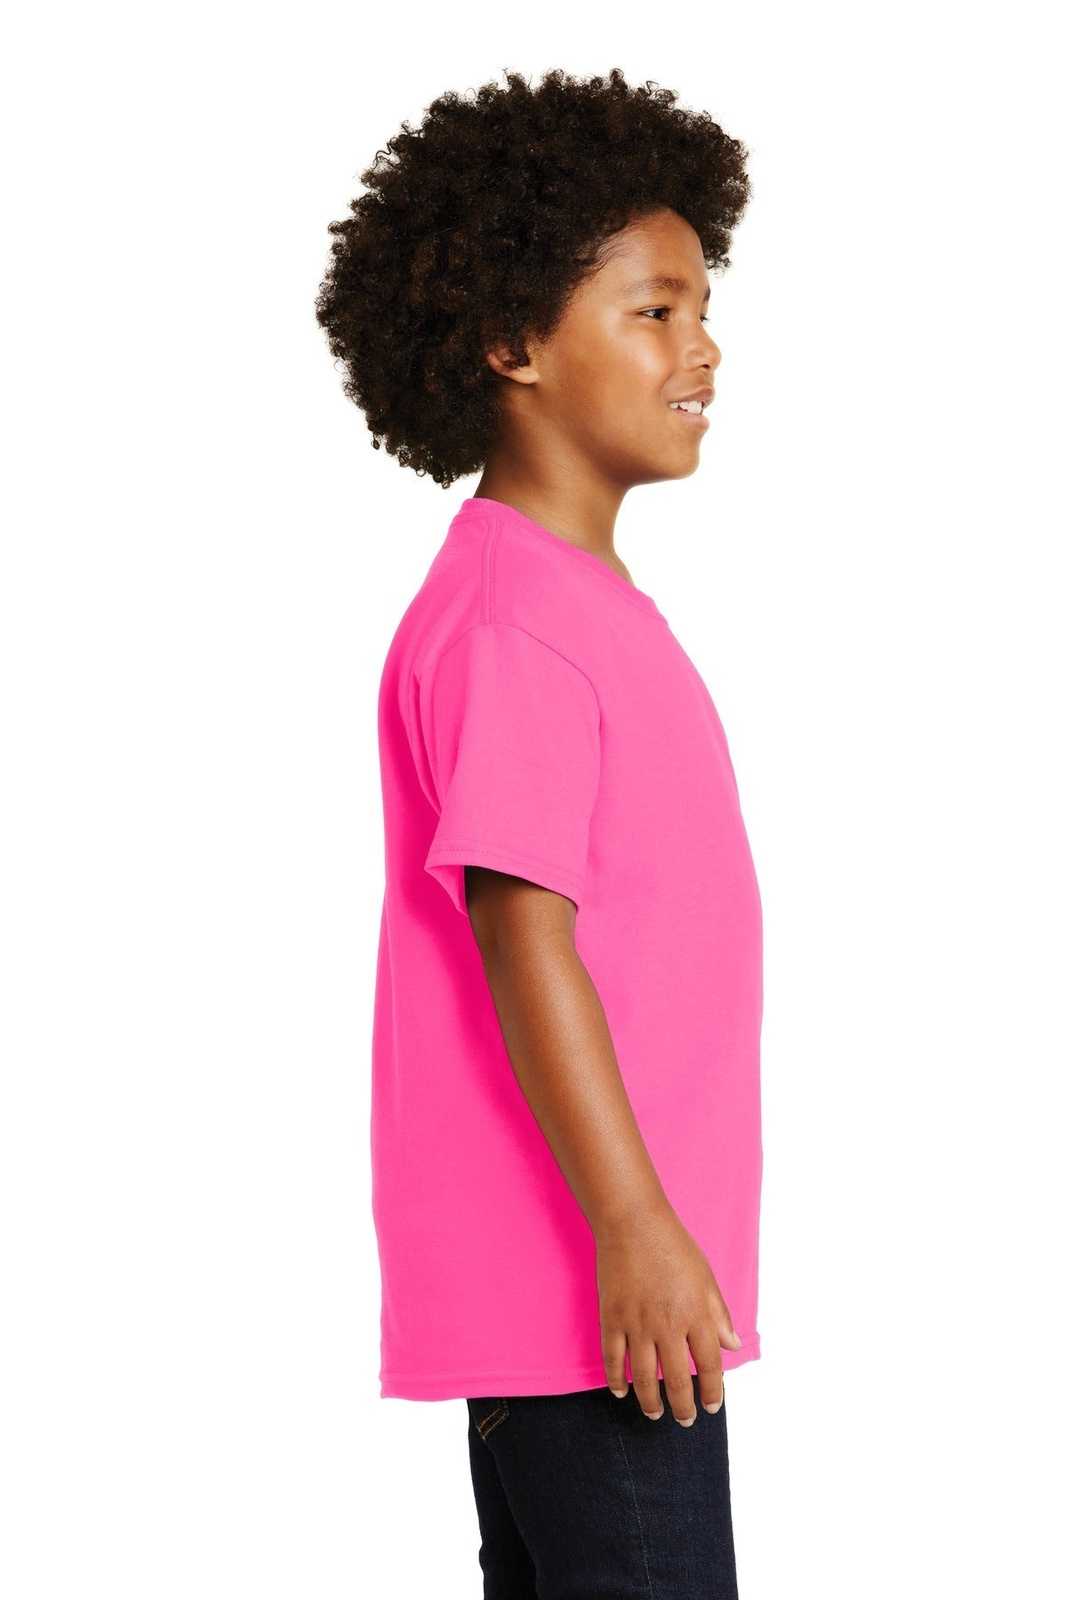 Gildan 2000B Youth Ultra Cotton 100% Cotton T-Shirt - Safety Pink - HIT a Double